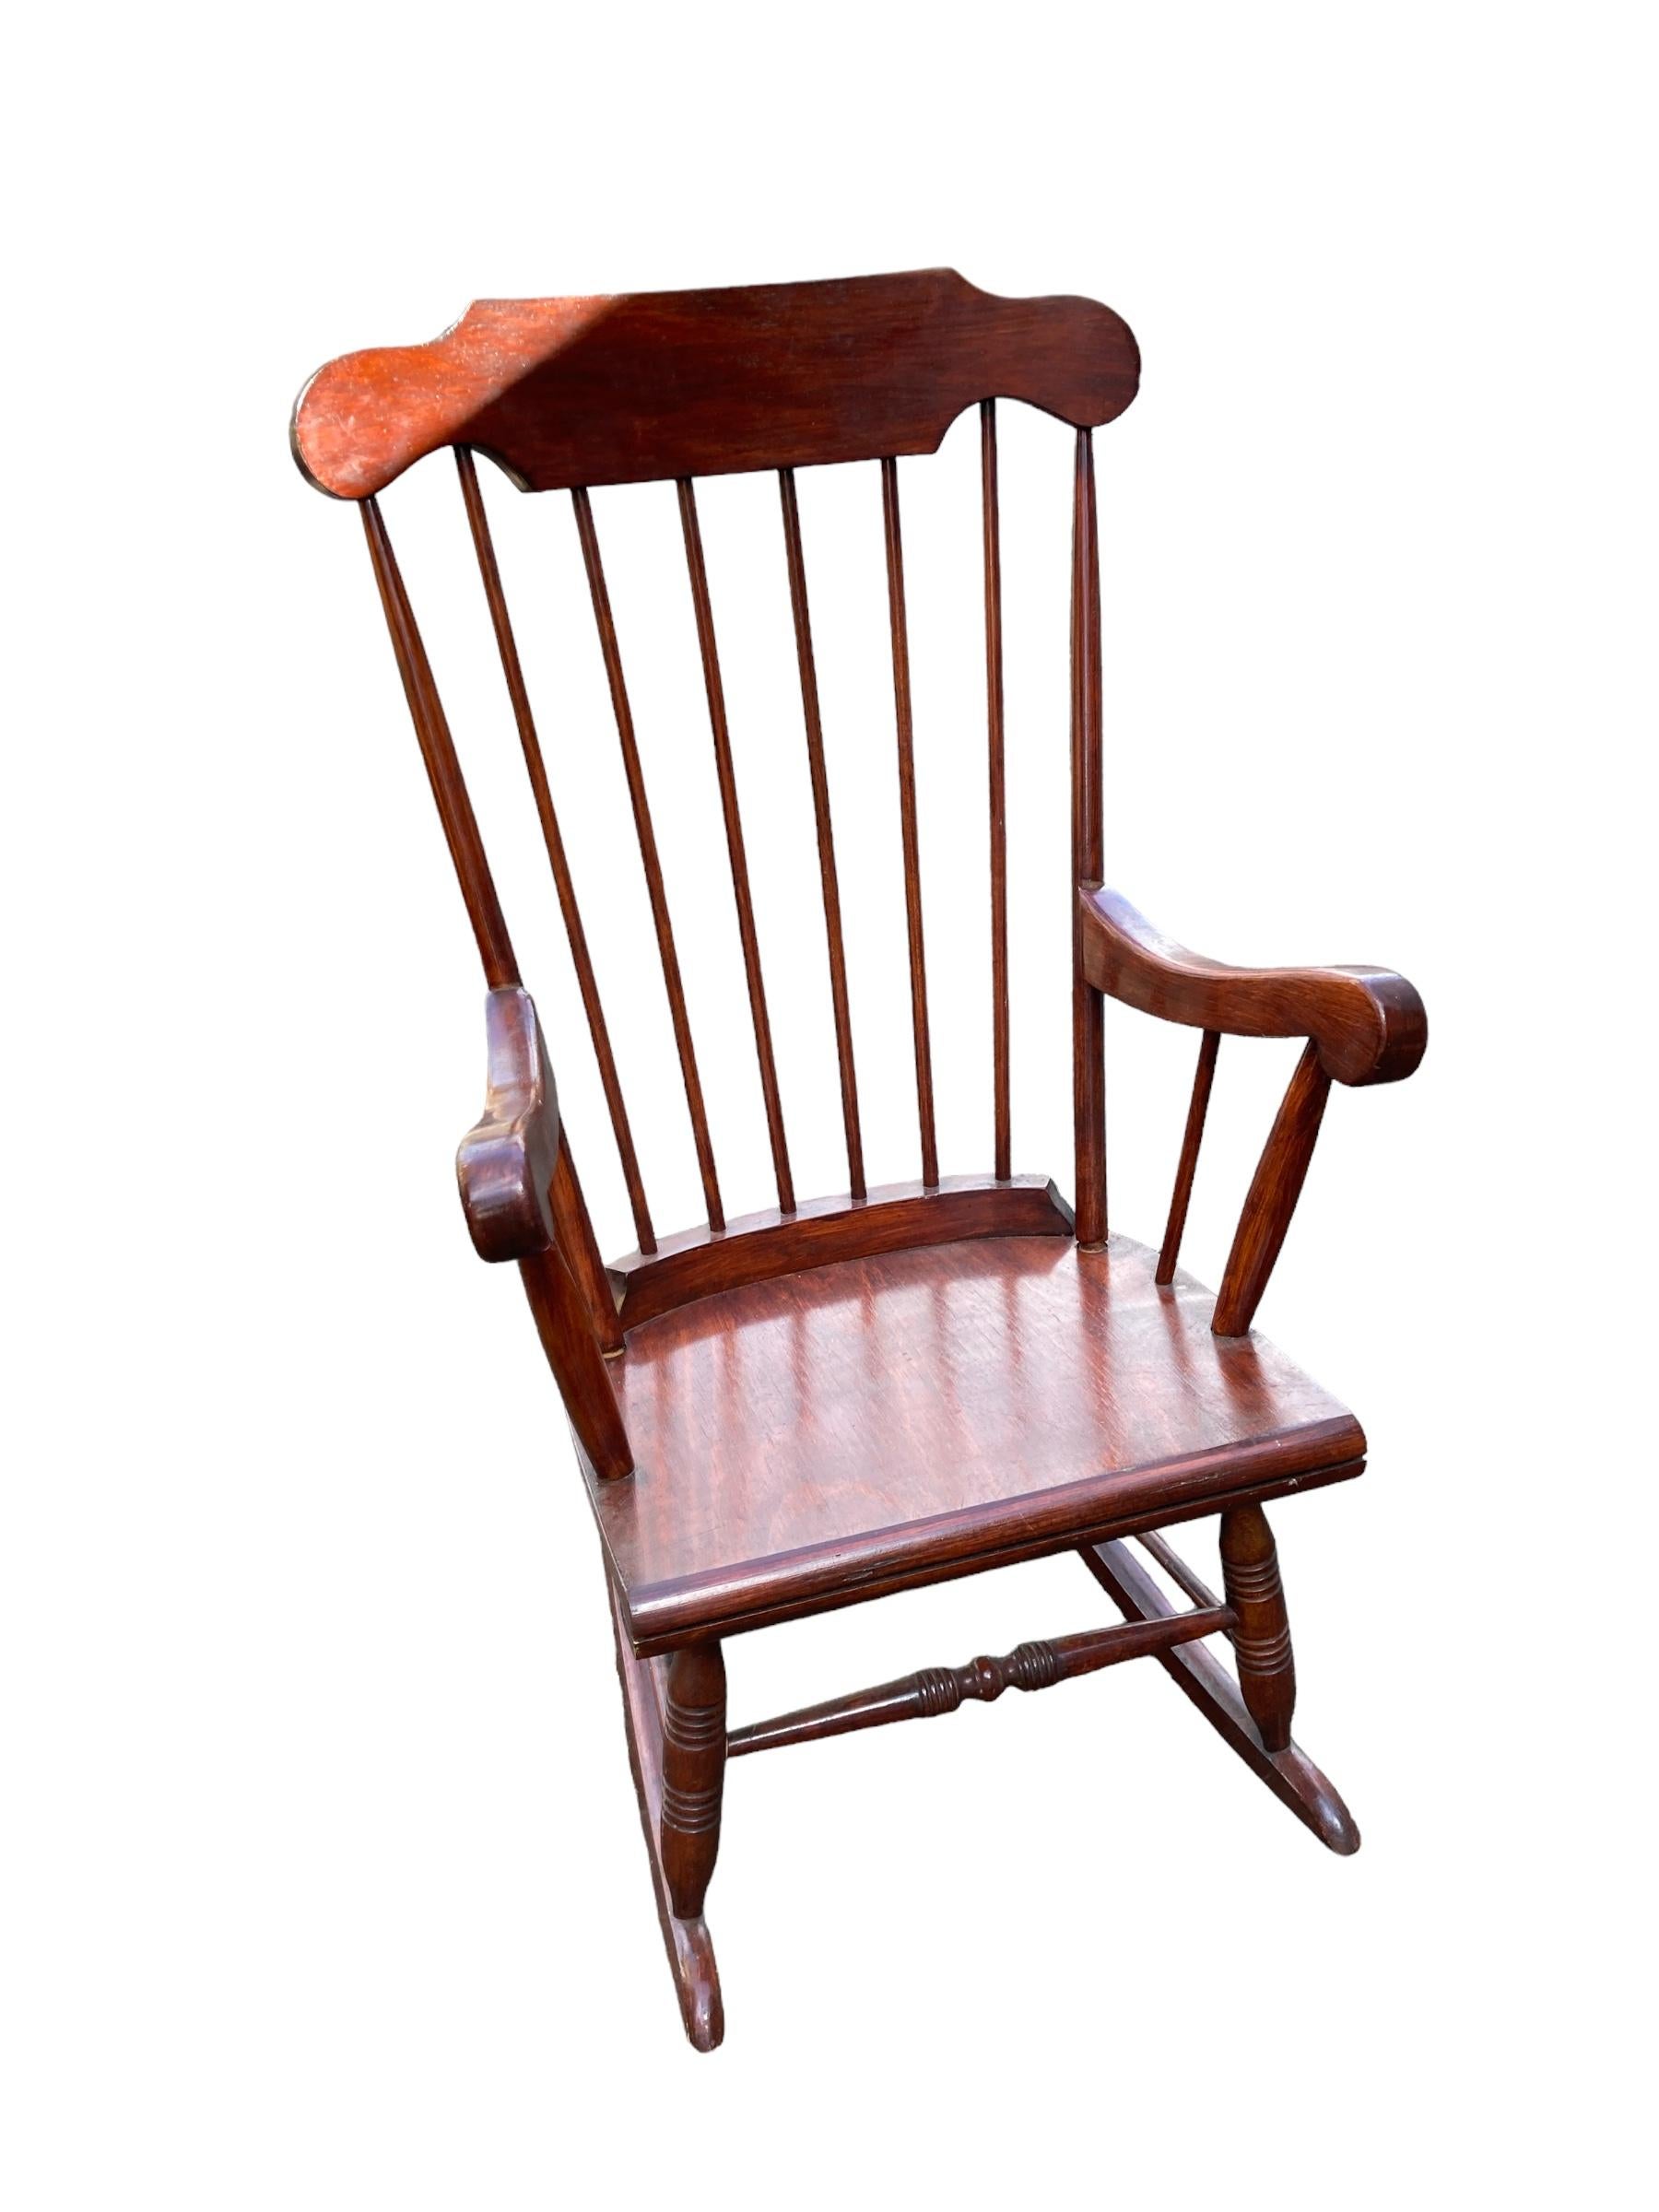 Windsor style rocking chair, Mid 20th Century, Red Mahogany wood For Sale 2